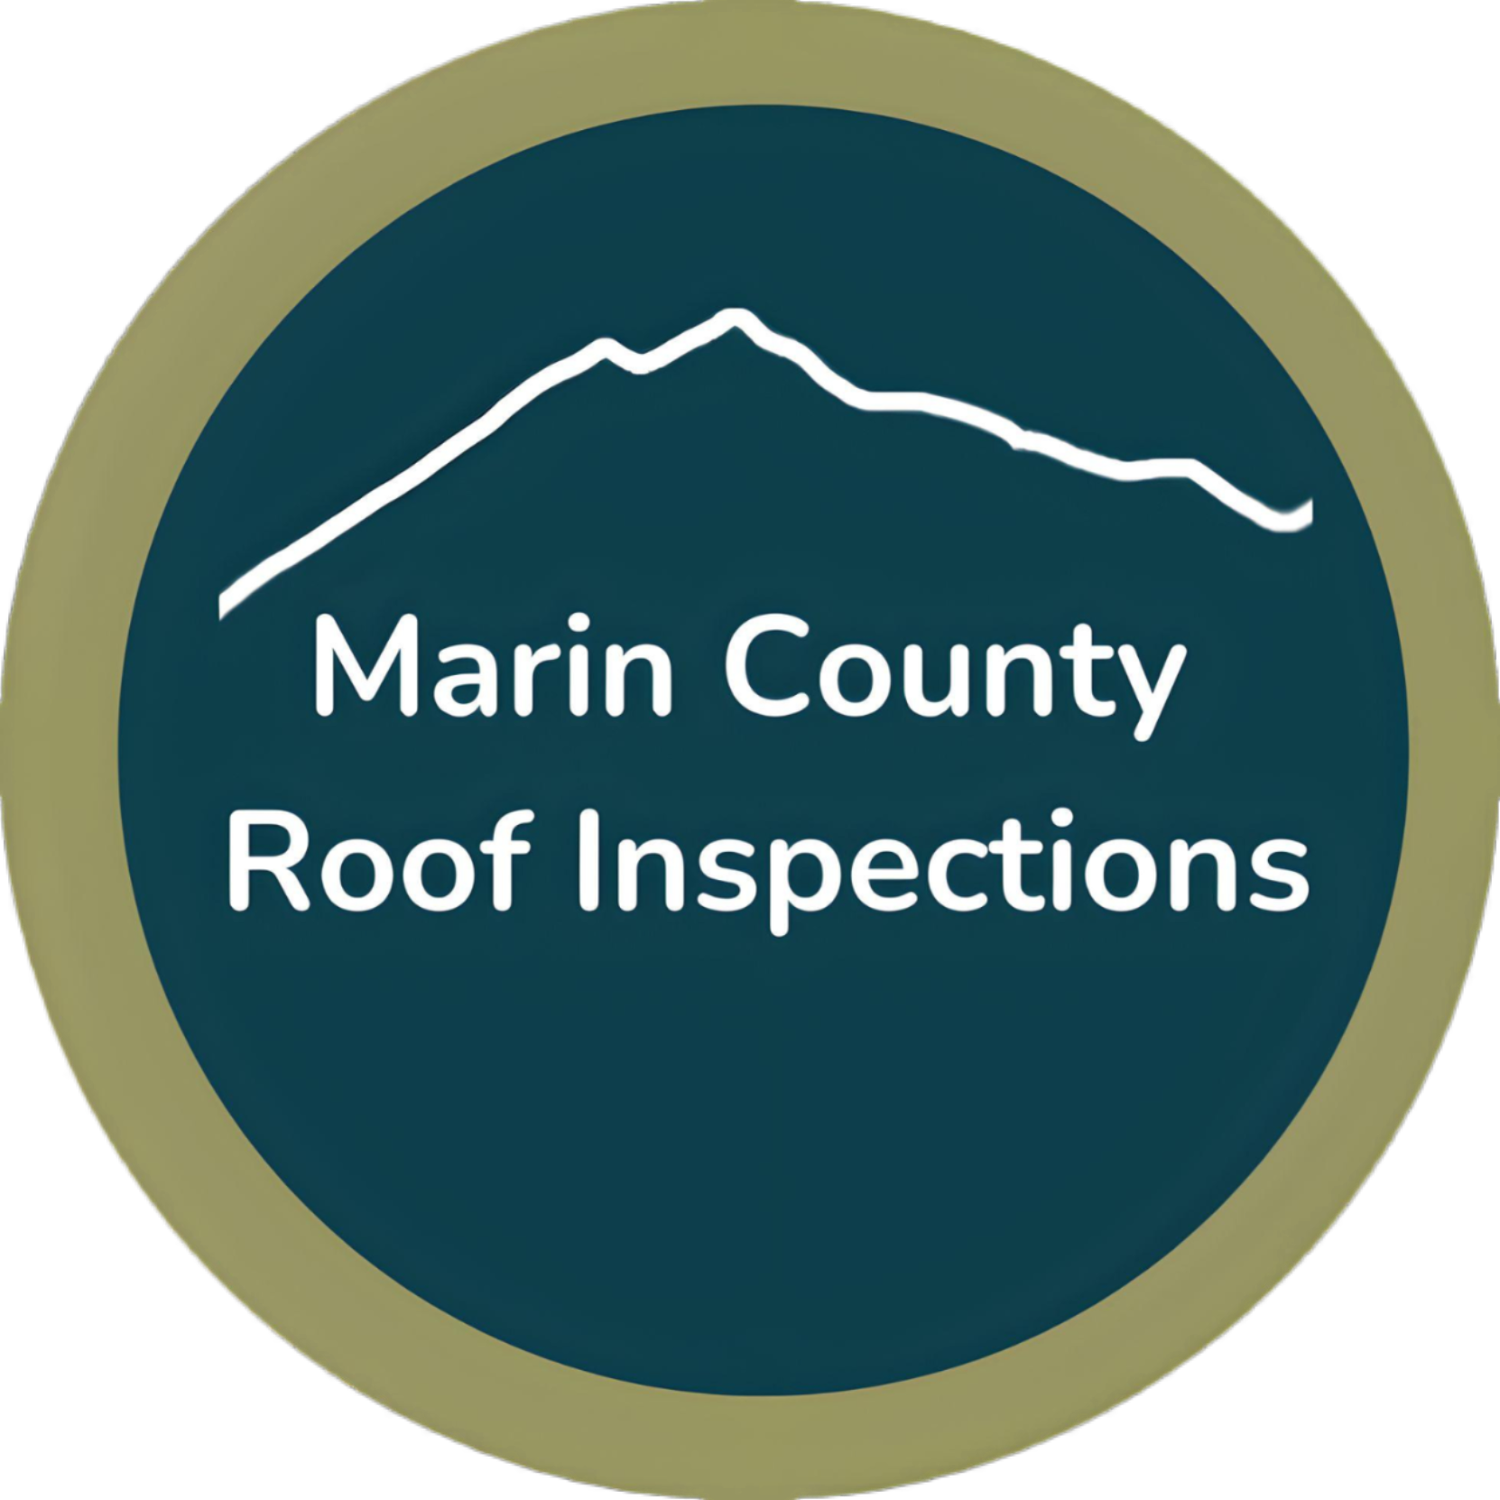 Marin County Roof Inspections